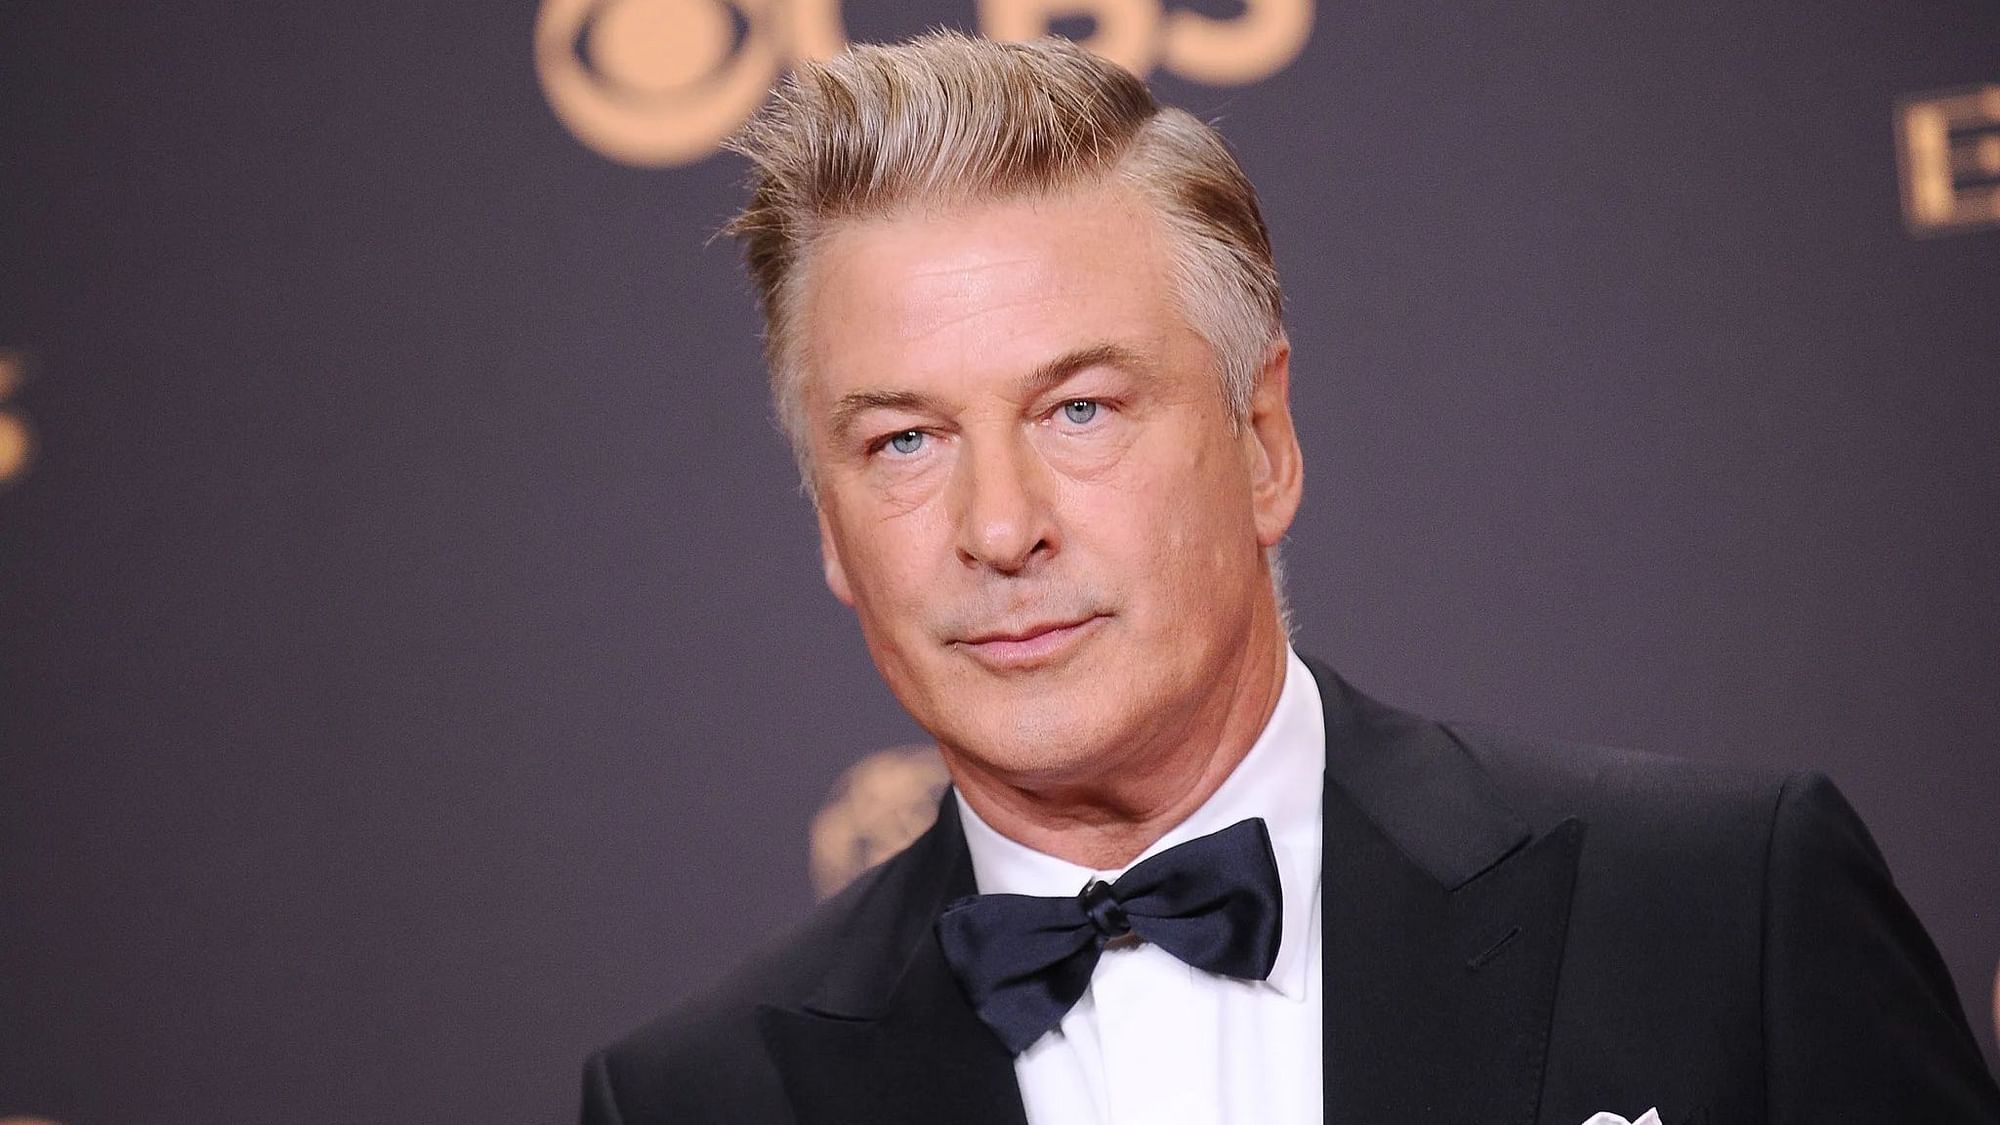 <div class="paragraphs"><p>Actor Alec Baldwin shot dead a cinematographer on 21 October 2021, while discharging a prop gun on set in New Mexico.</p></div>